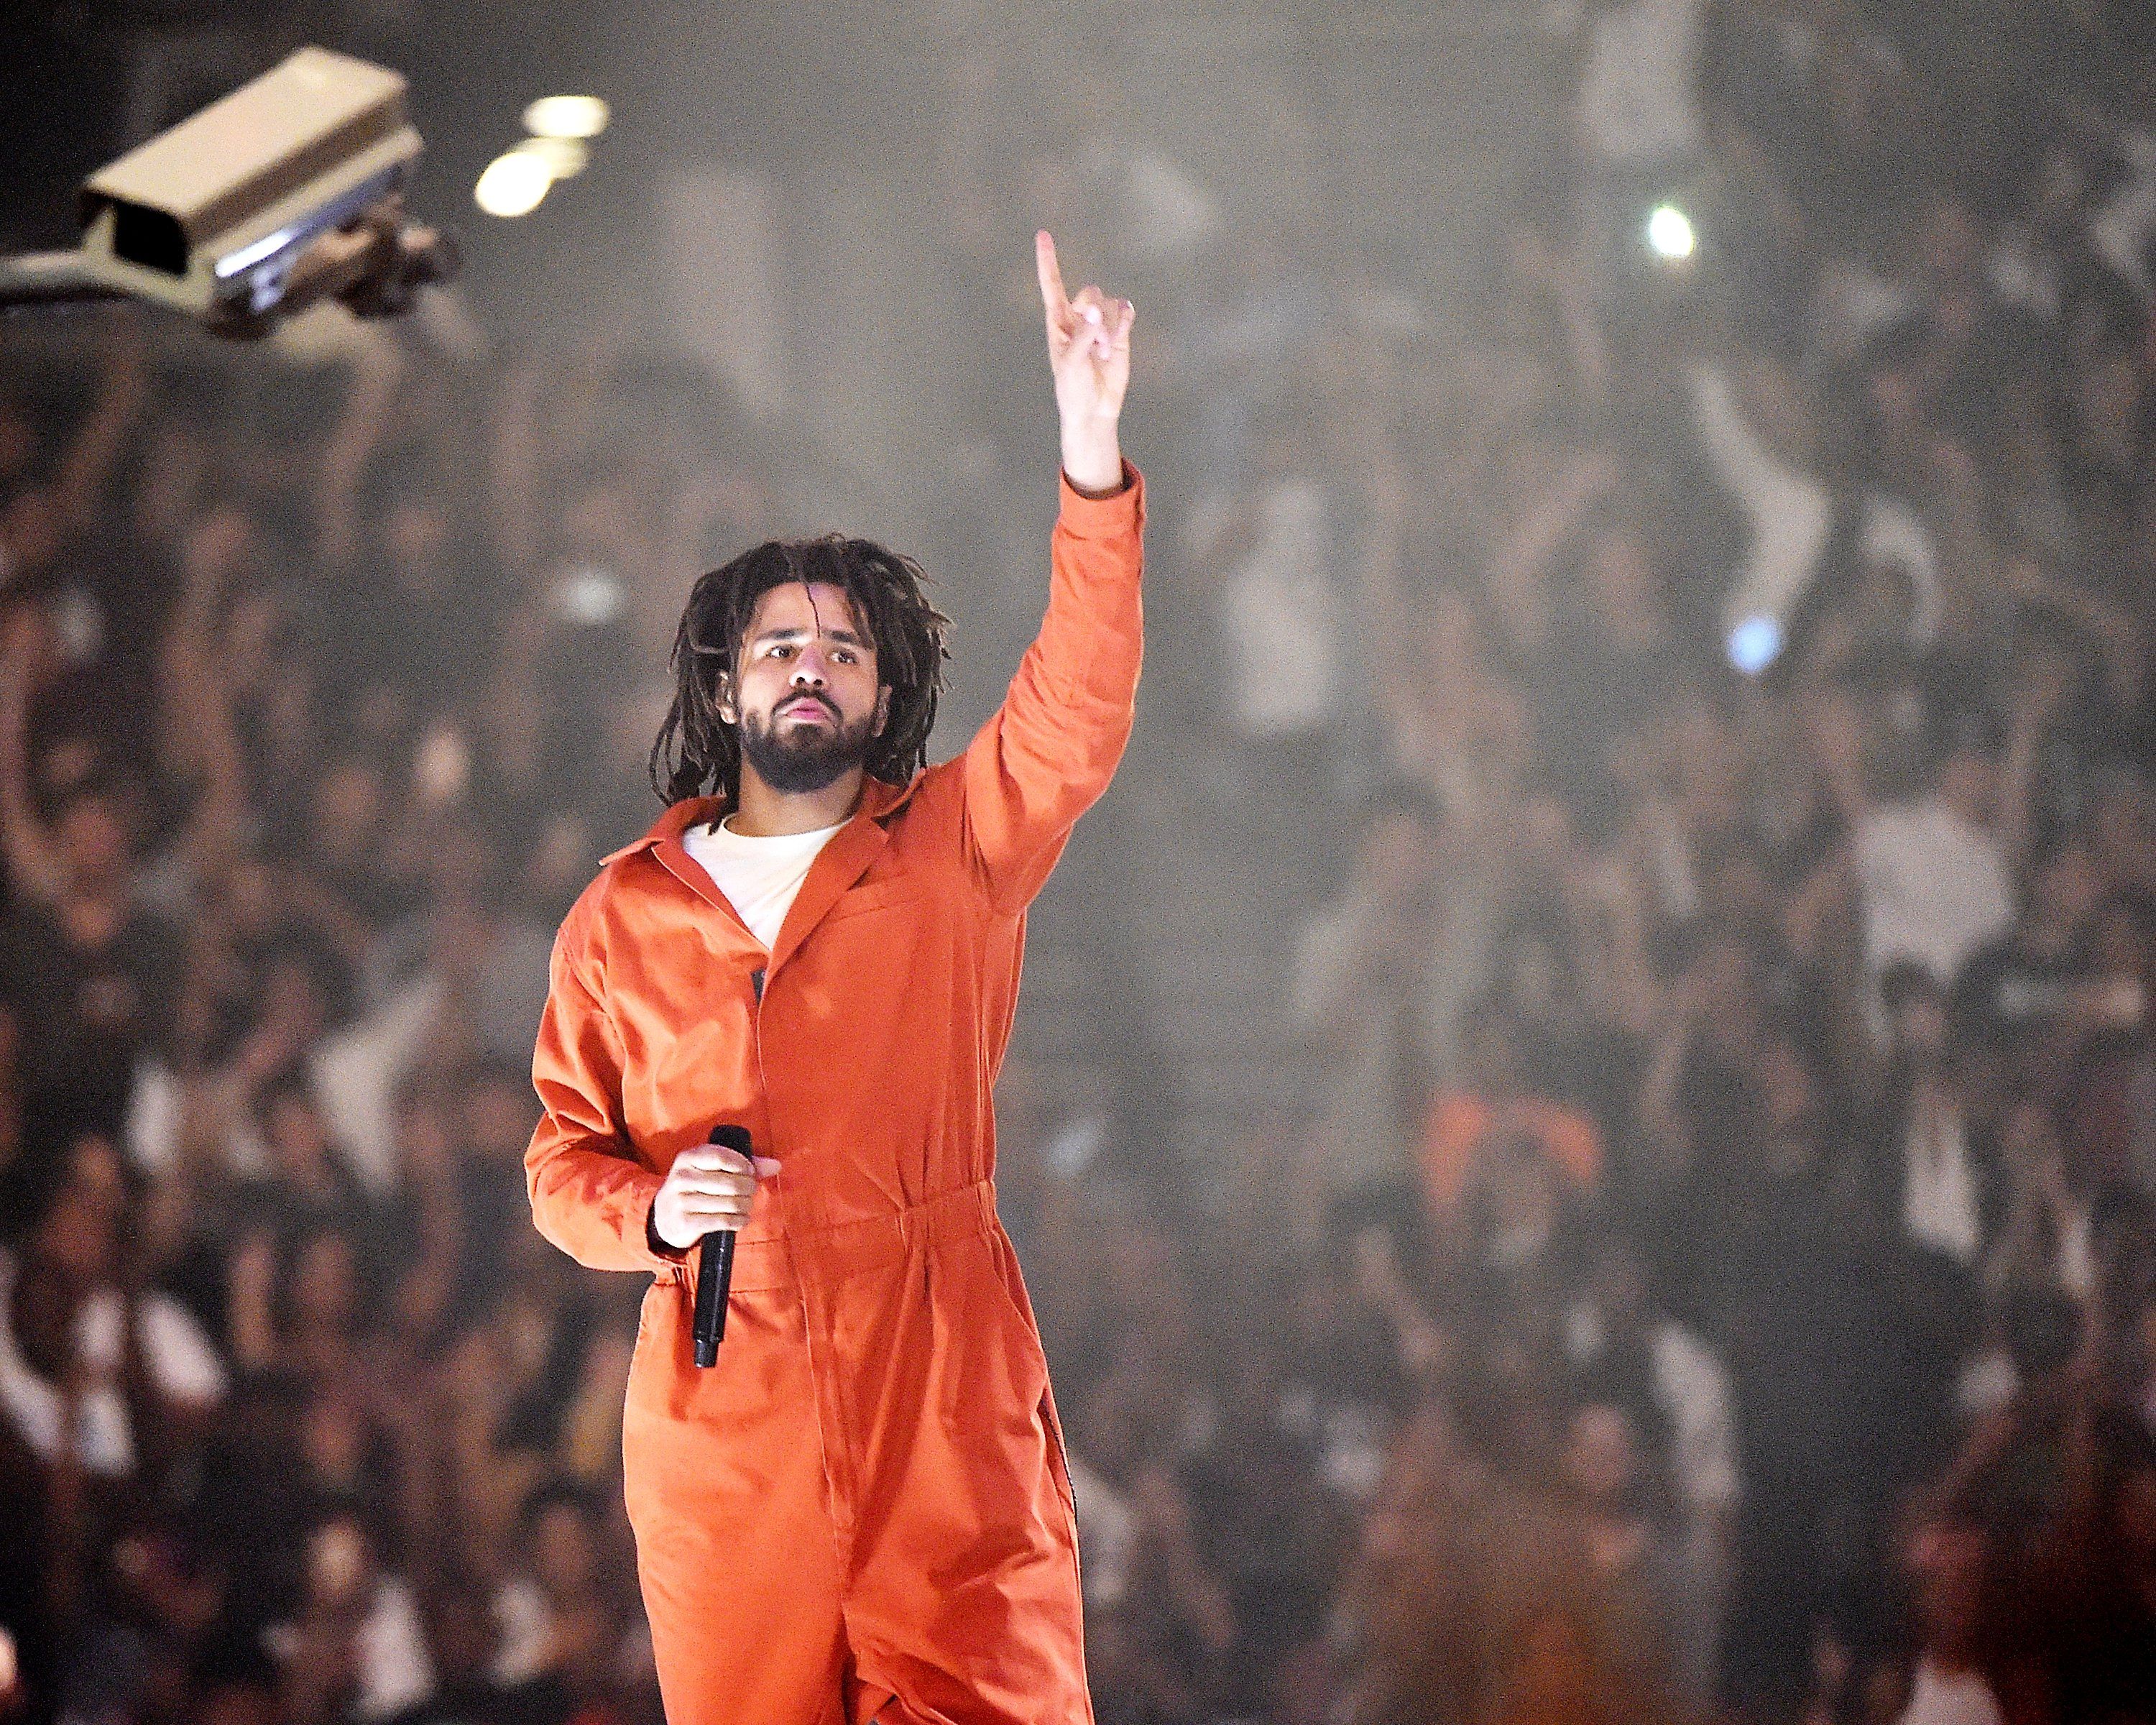 J. Cole Is Set To Perform At Sunday's 2018 BET Awards